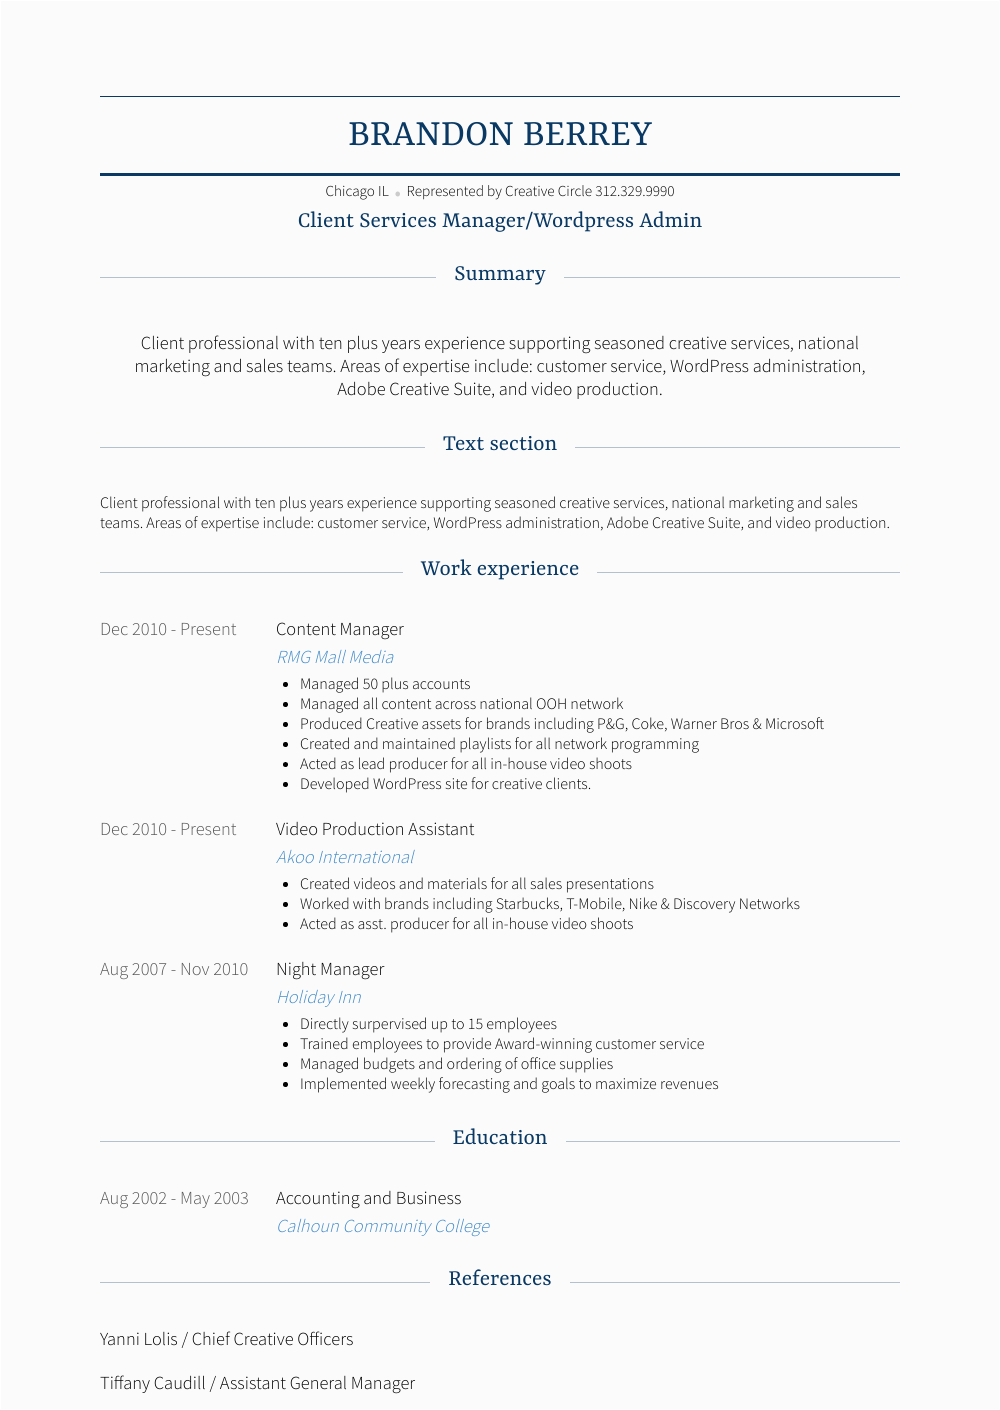 Sample Resume for Web Content Manager Content Manager Resume Samples and Templates